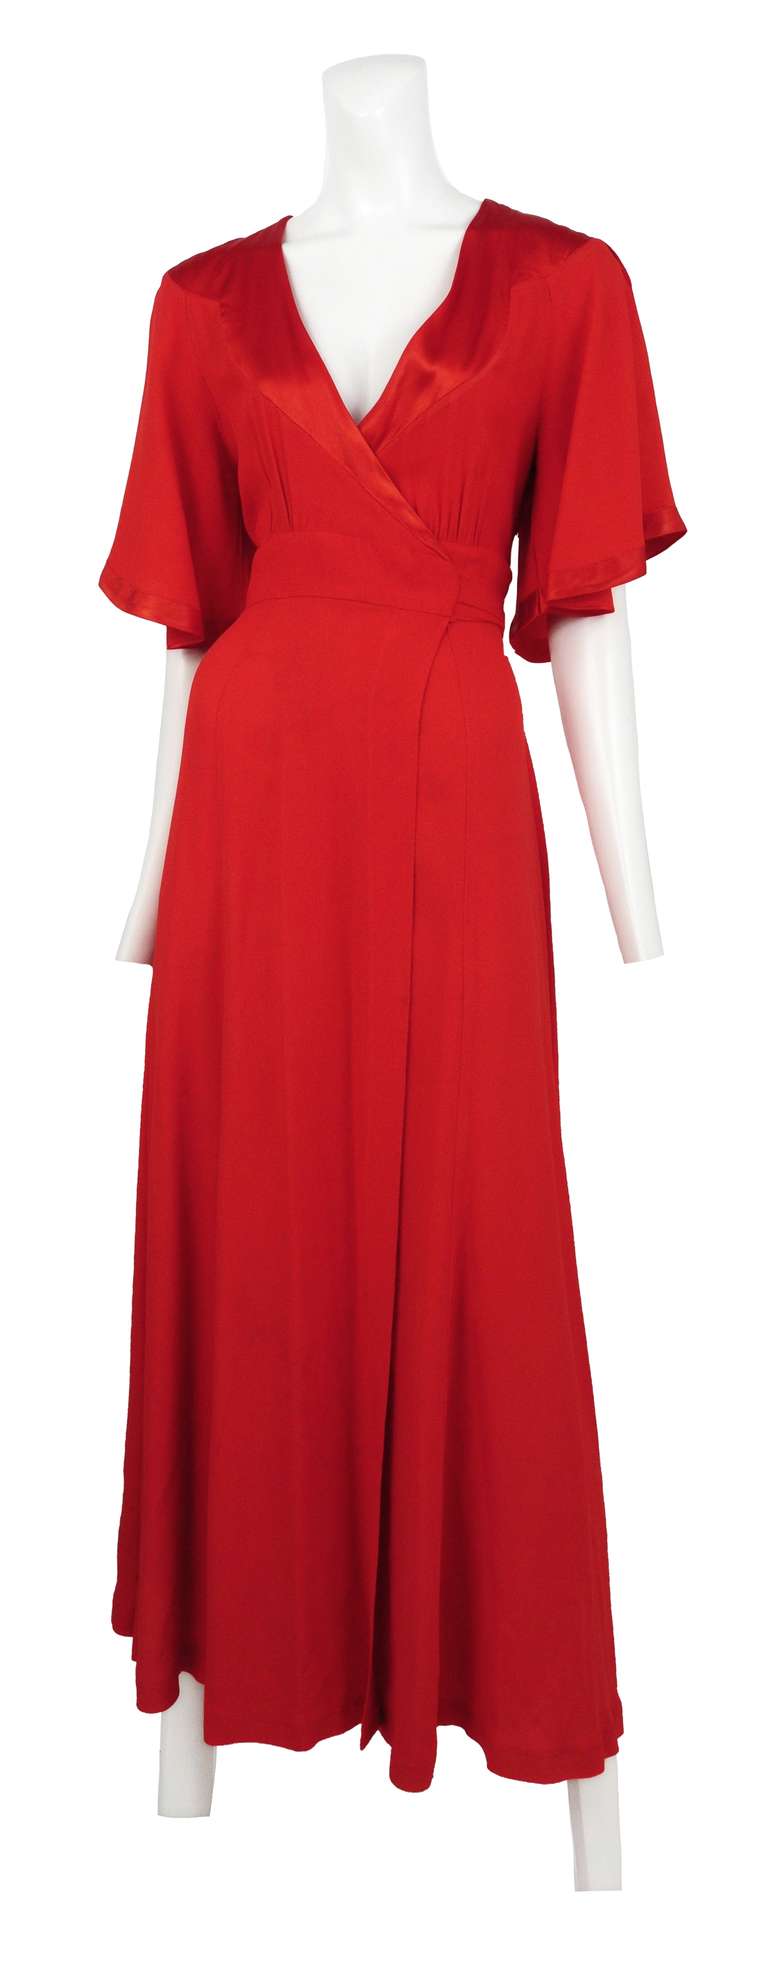 Ossie Clark red crepe wrap dress with red stain insets.